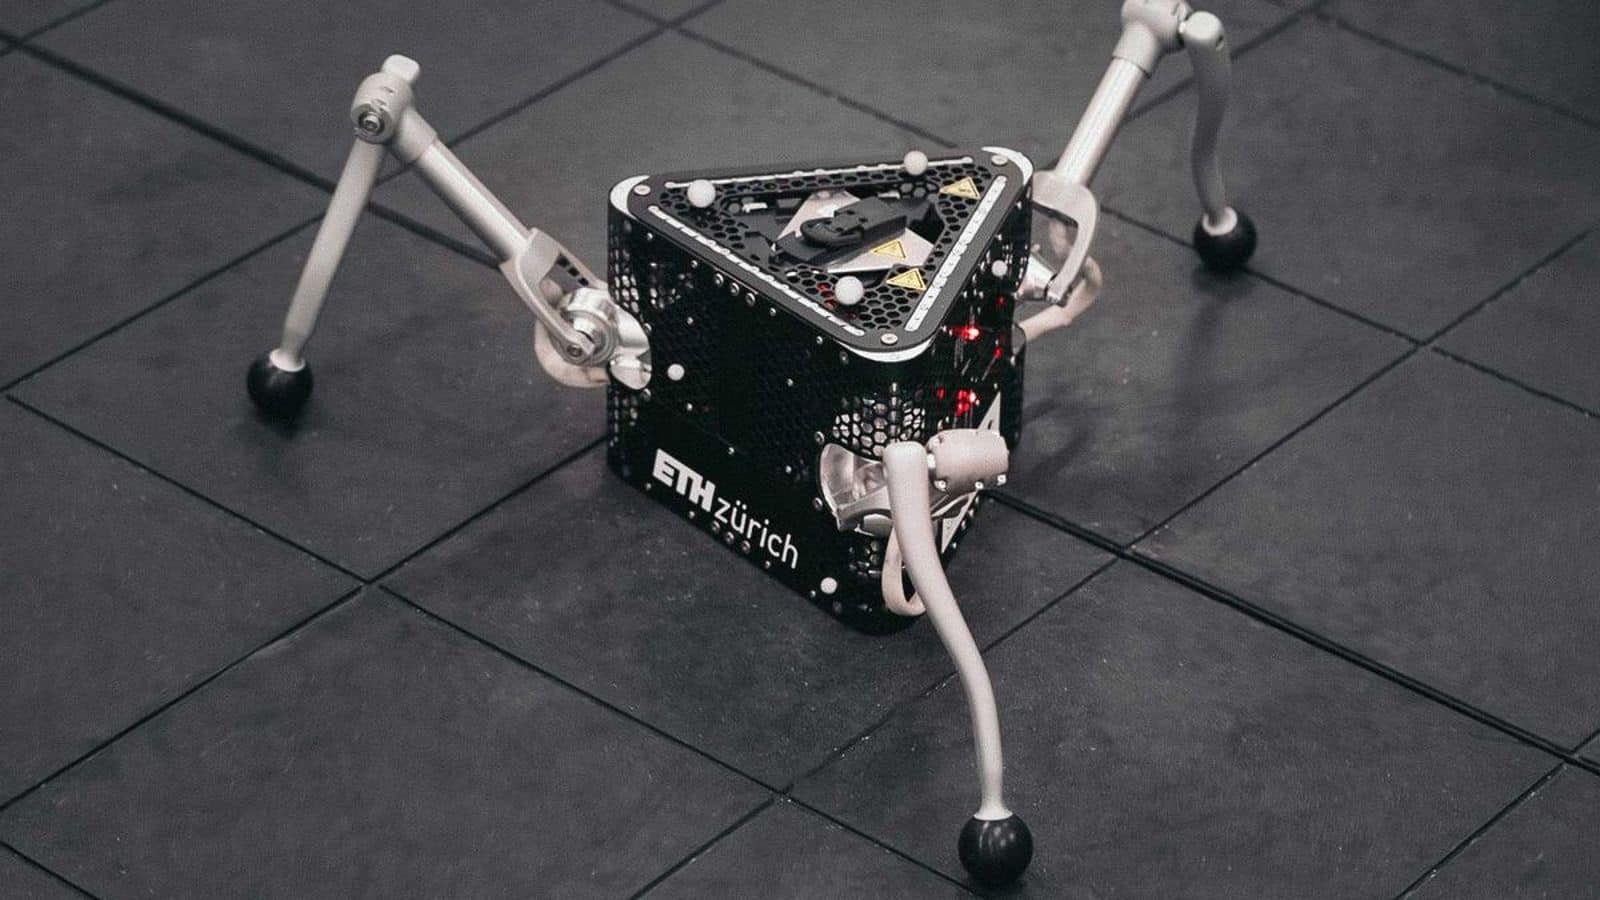 This mini robot can hop in zero-gravity to investigate asteroids